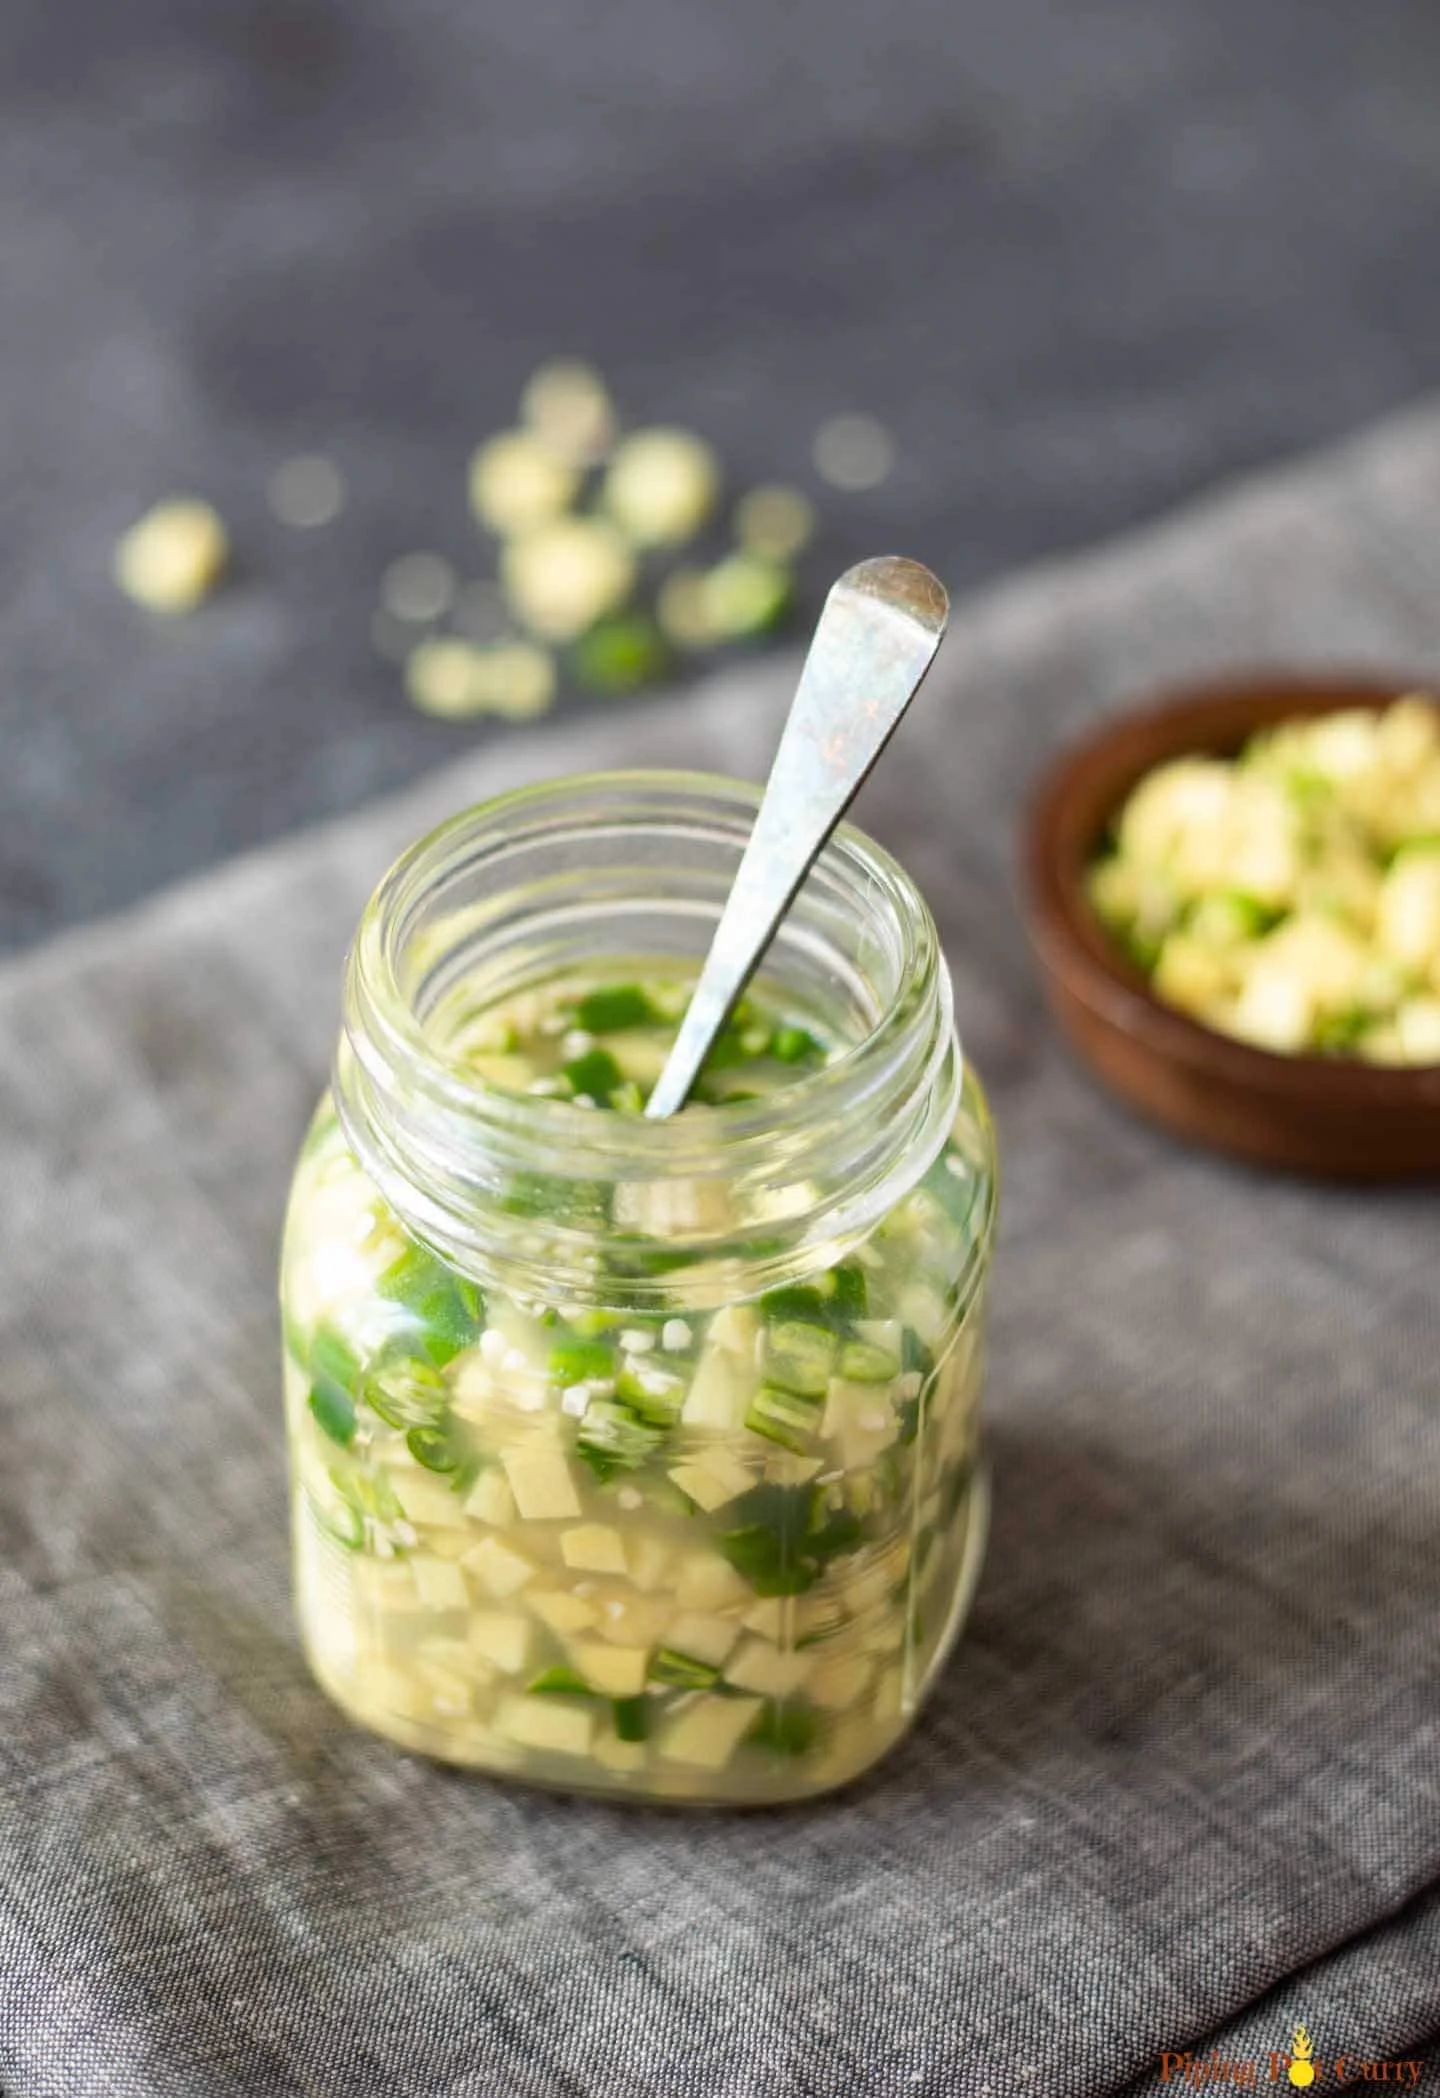 Ginger green chili pickle in a glass bottle